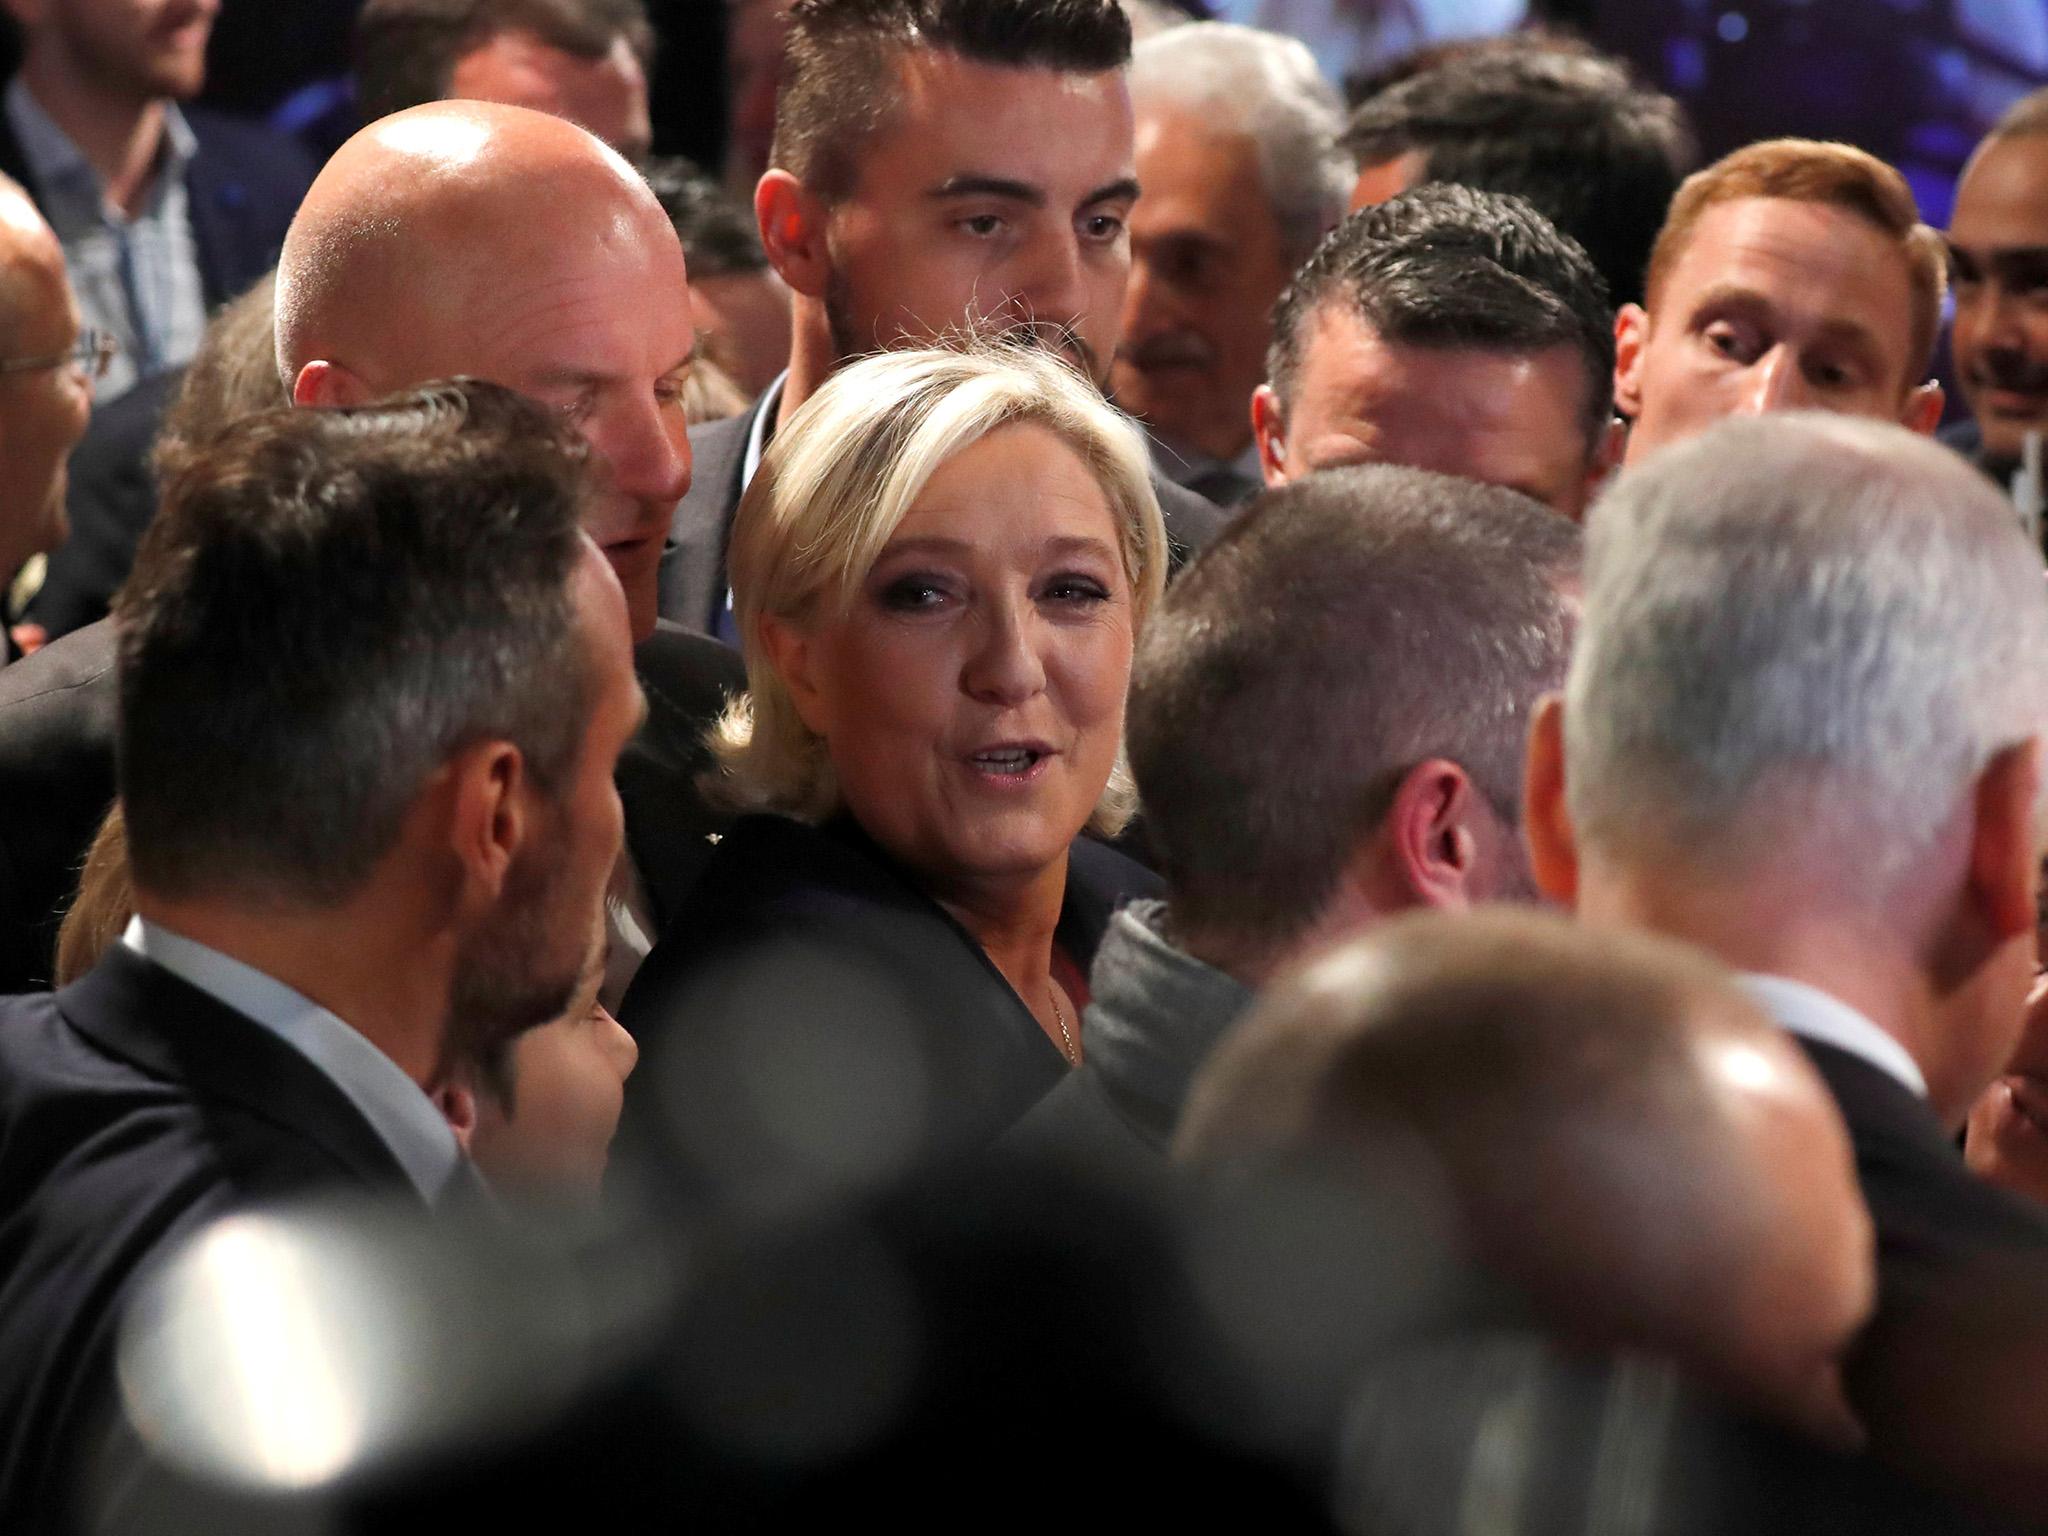 ‘She made giant steps,’ one supporter said of the defeated Front National leader